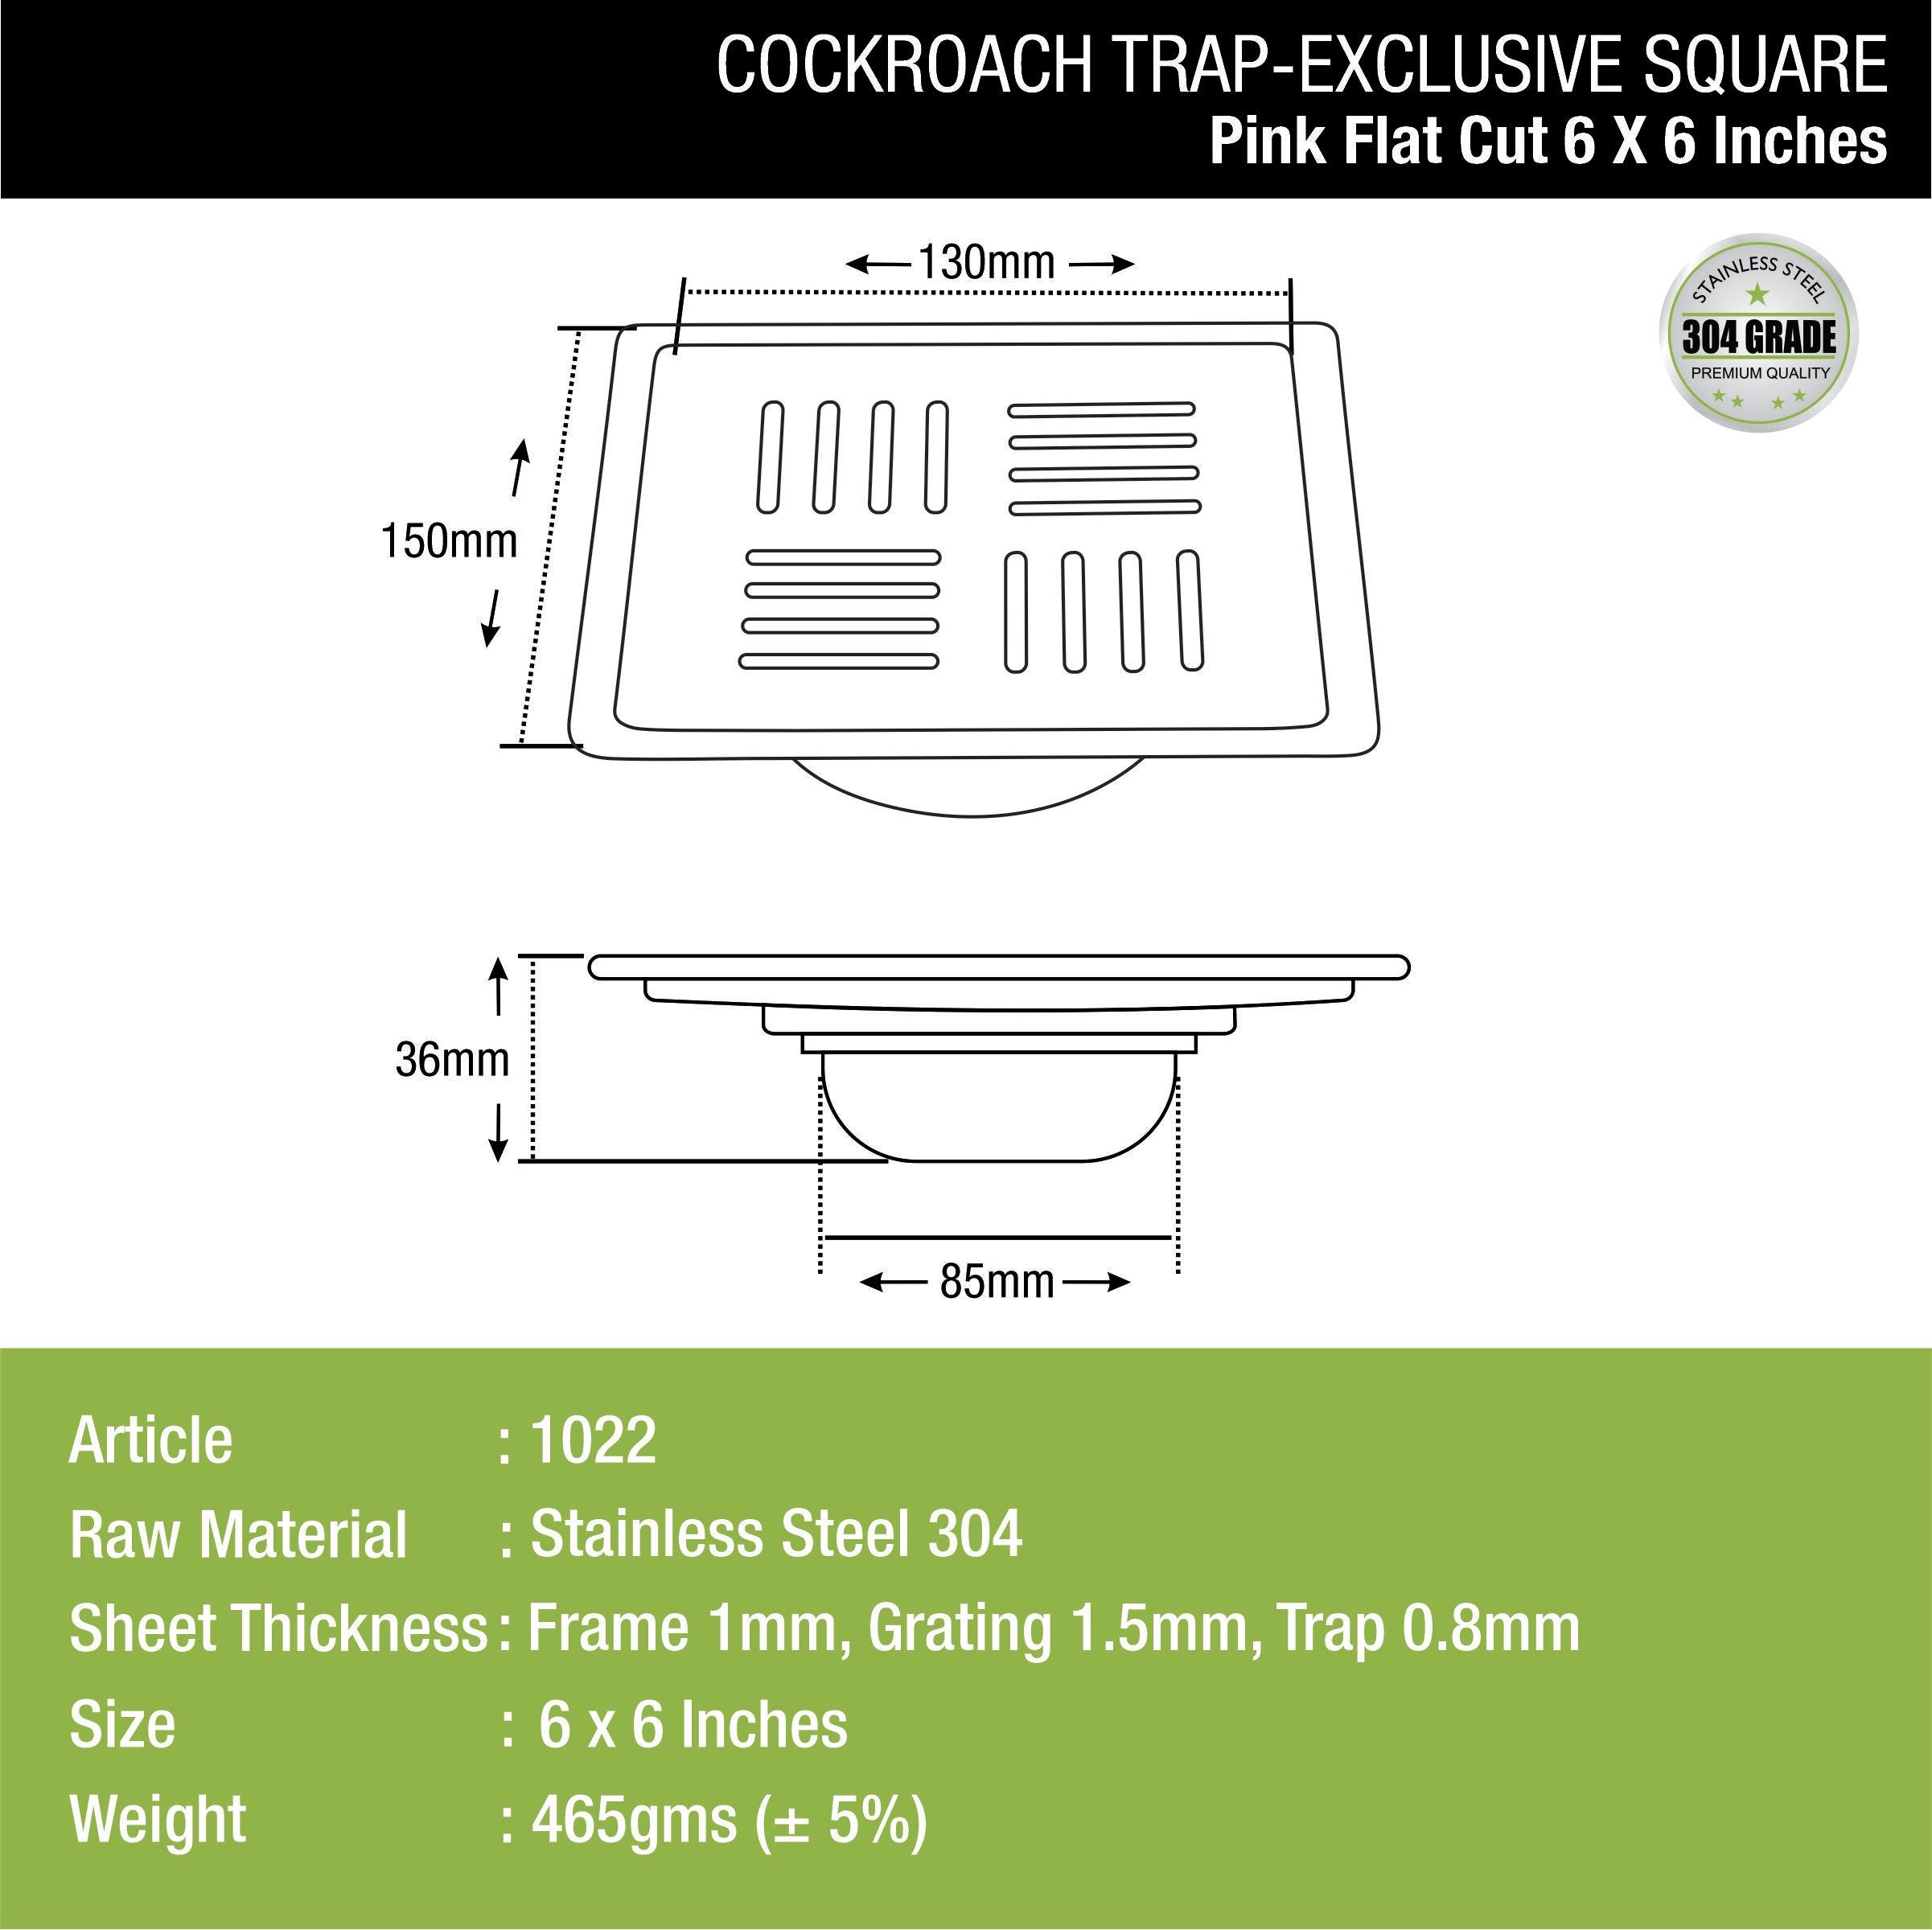 Pink Exclusive Square Flat Cut Floor Drain (6 x 6 Inches) with Cockroach Trap dimensions and sizes